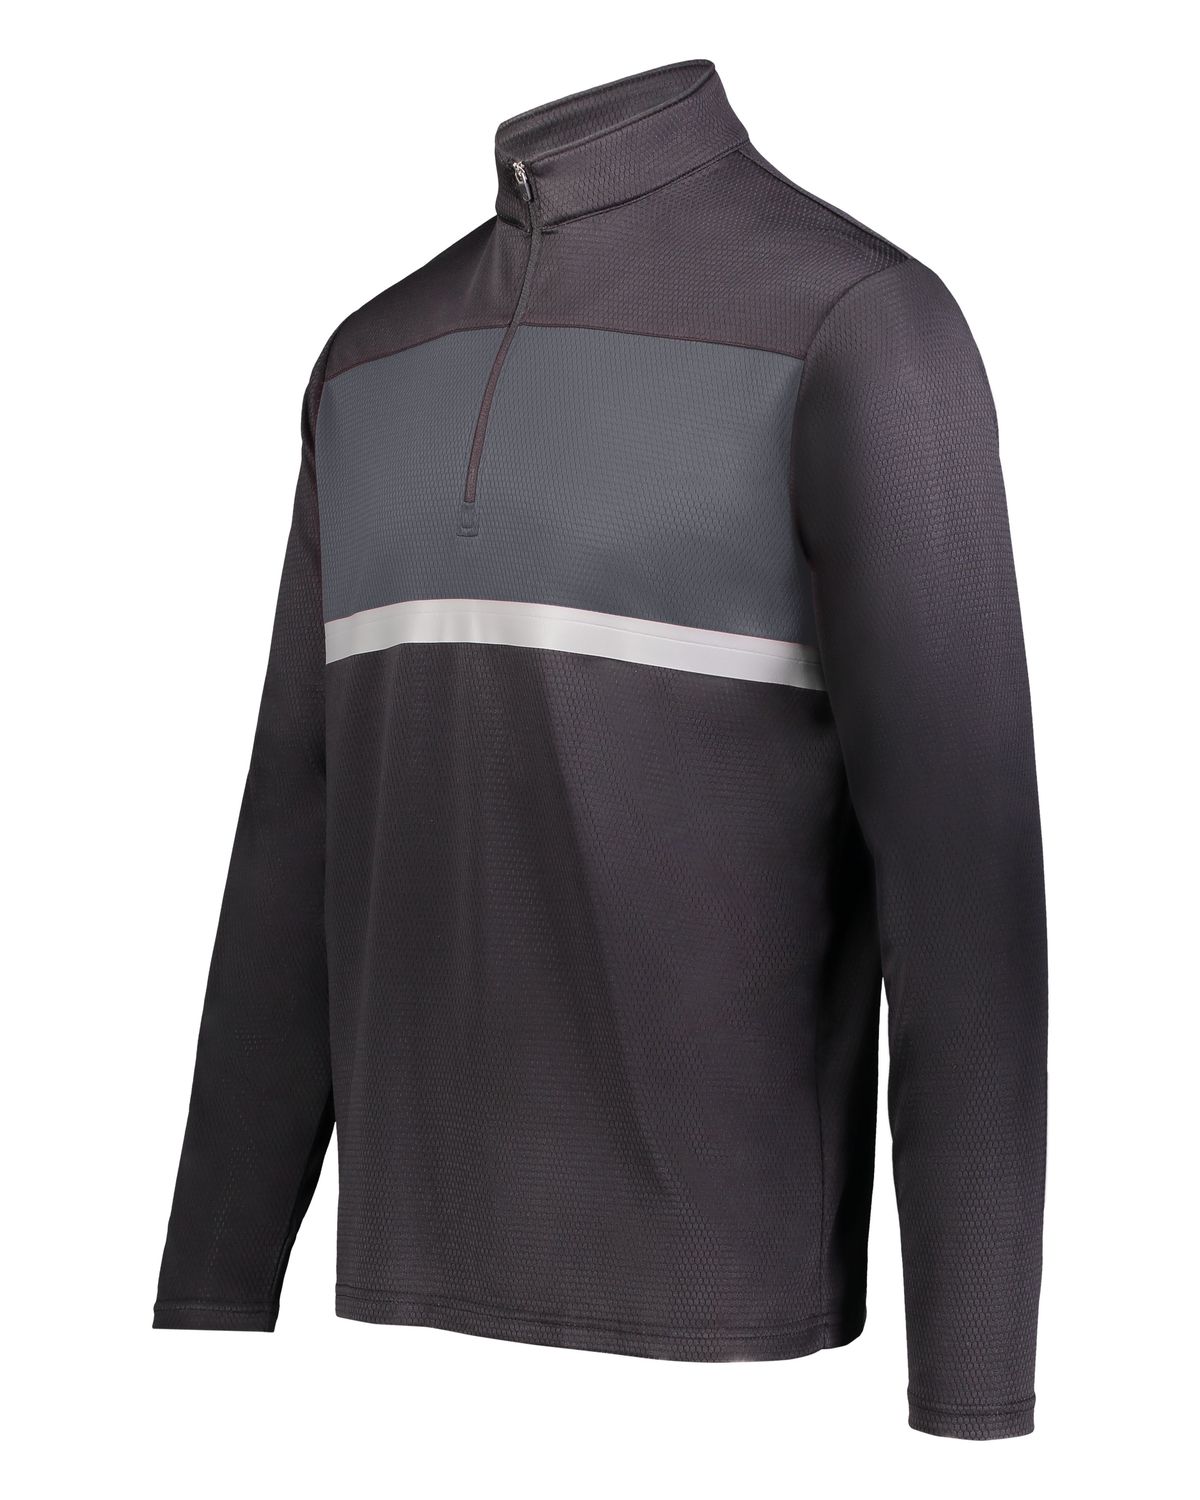 Wholesale Athletic Pullovers